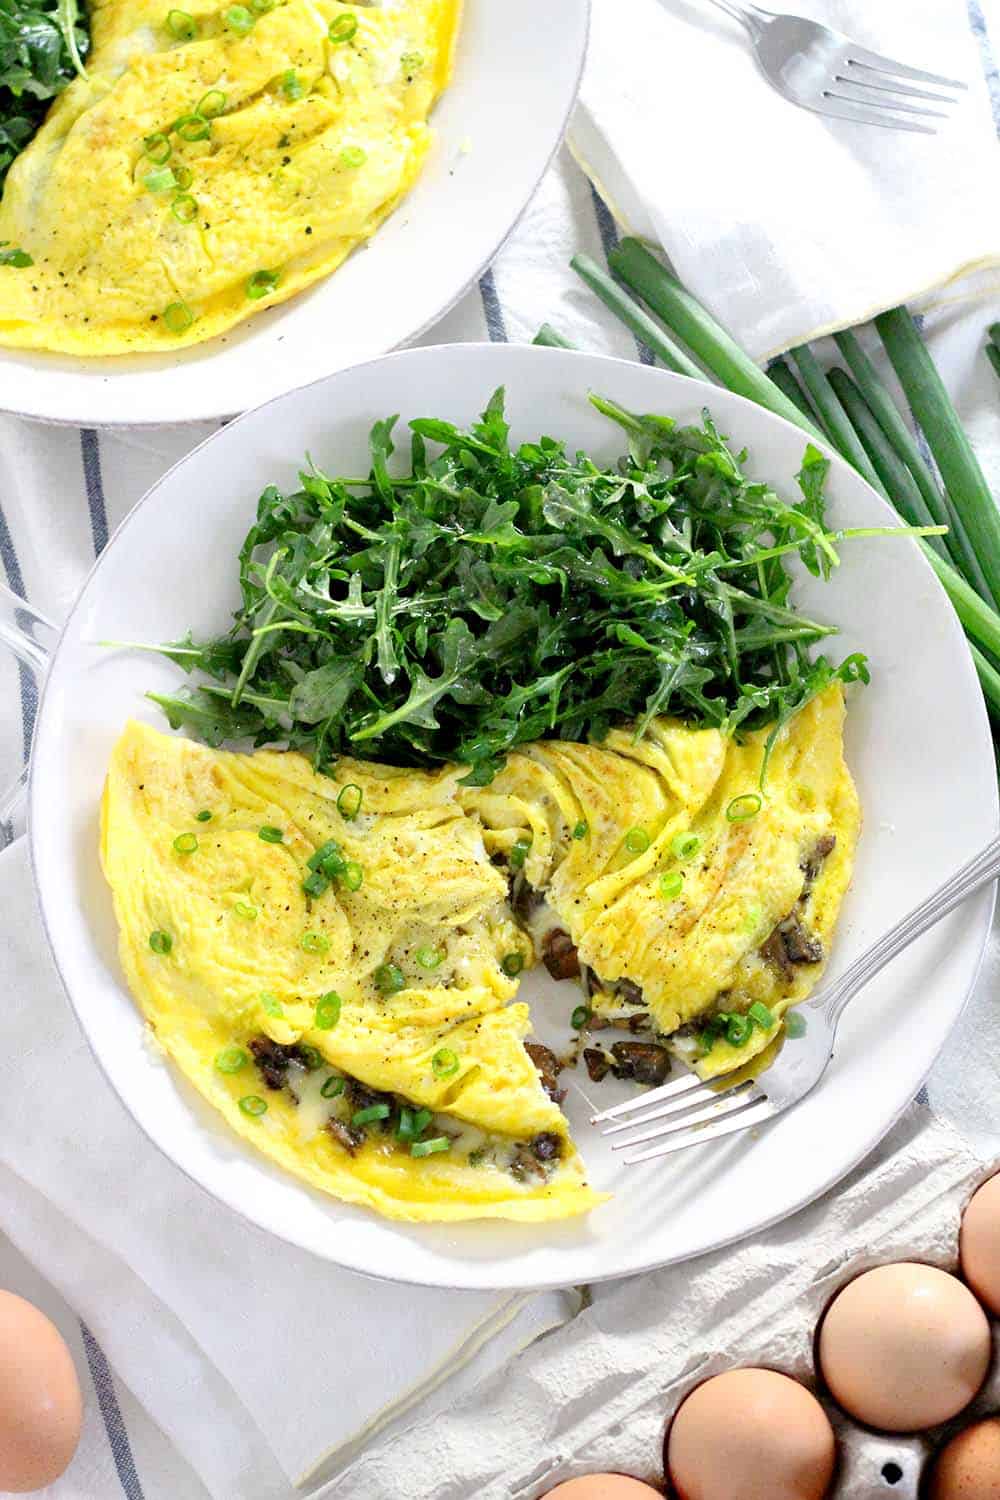 These Mushroom and Cheddar Omelettes are the perfect low-carb, healthy, fast meal to make any time of the day! This vegetarian recipe takes only ten minutes to throw together.